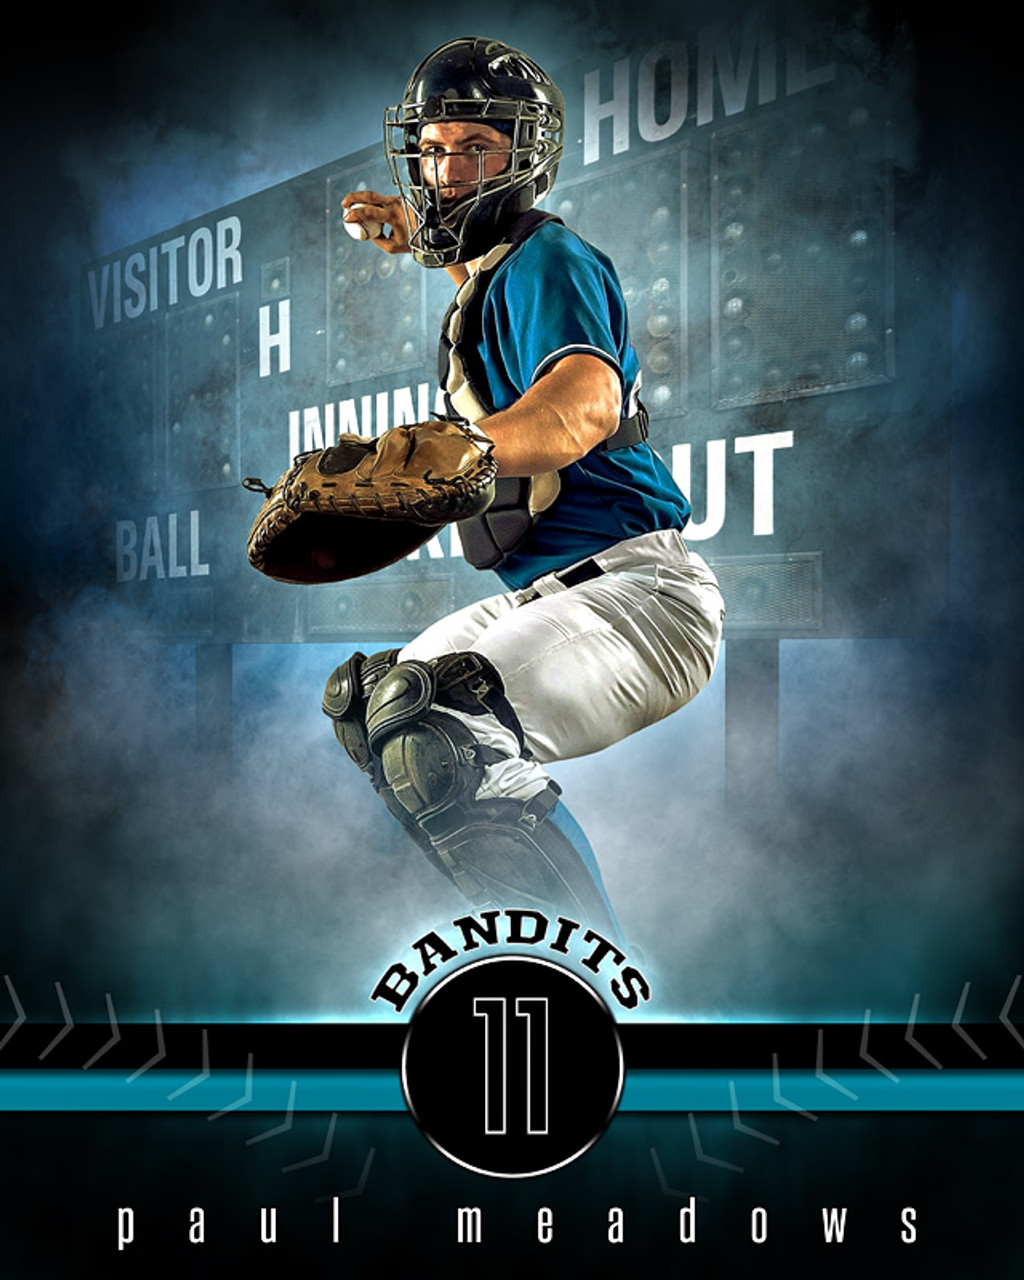 SPORTS POSTER TEMPLATE - FANTASY BASEBALL- PHOTOSHOP SPORTS TEMPLATE